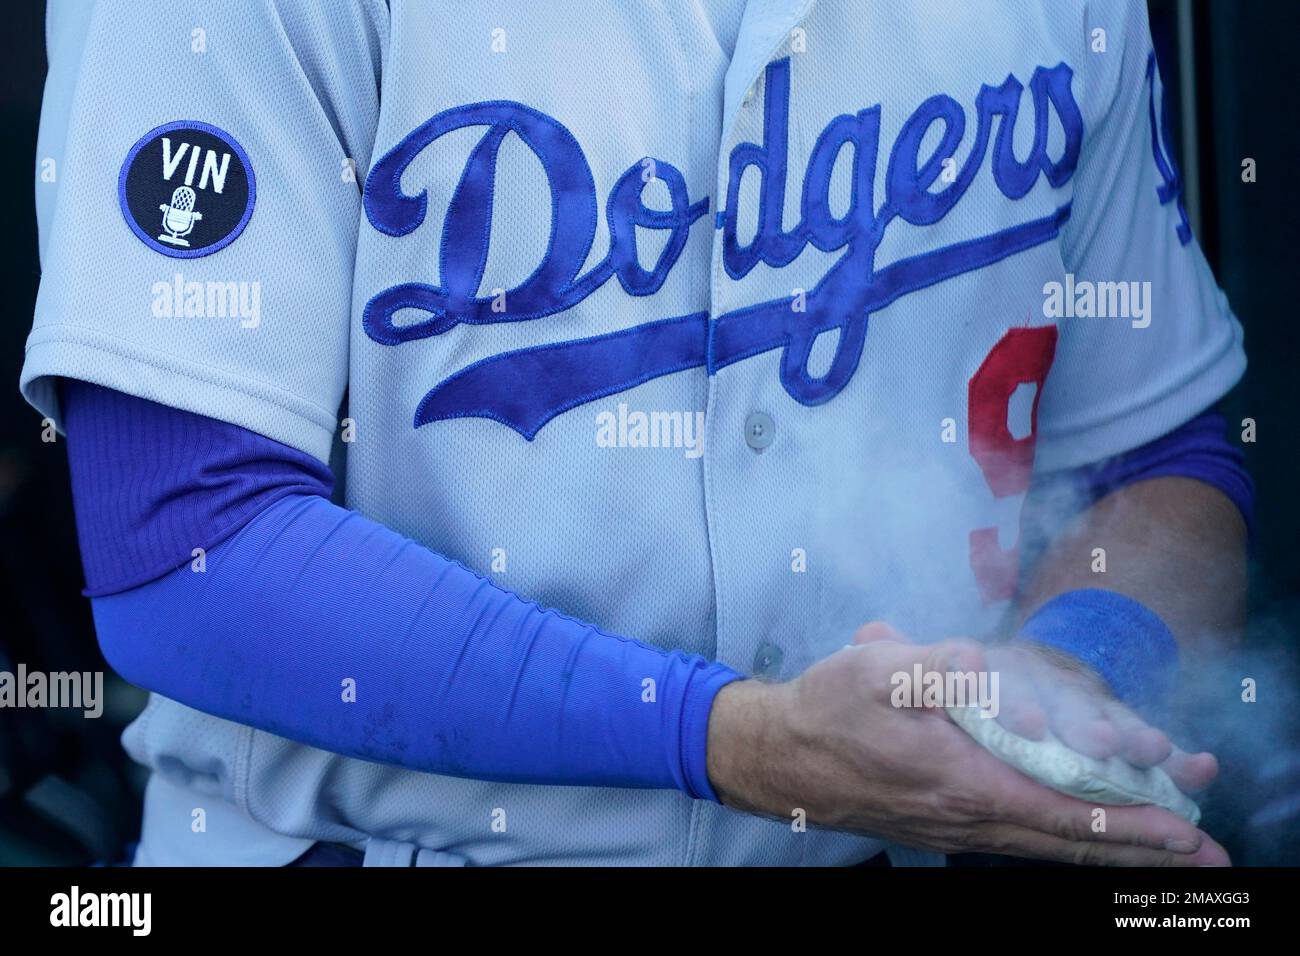 A patch for announcer Vin Scully is shown on the jersey of Los Angeles  Dodgers' Gavin Lux before a baseball game between the San Francisco Giants  and the Dodgers in San Francisco